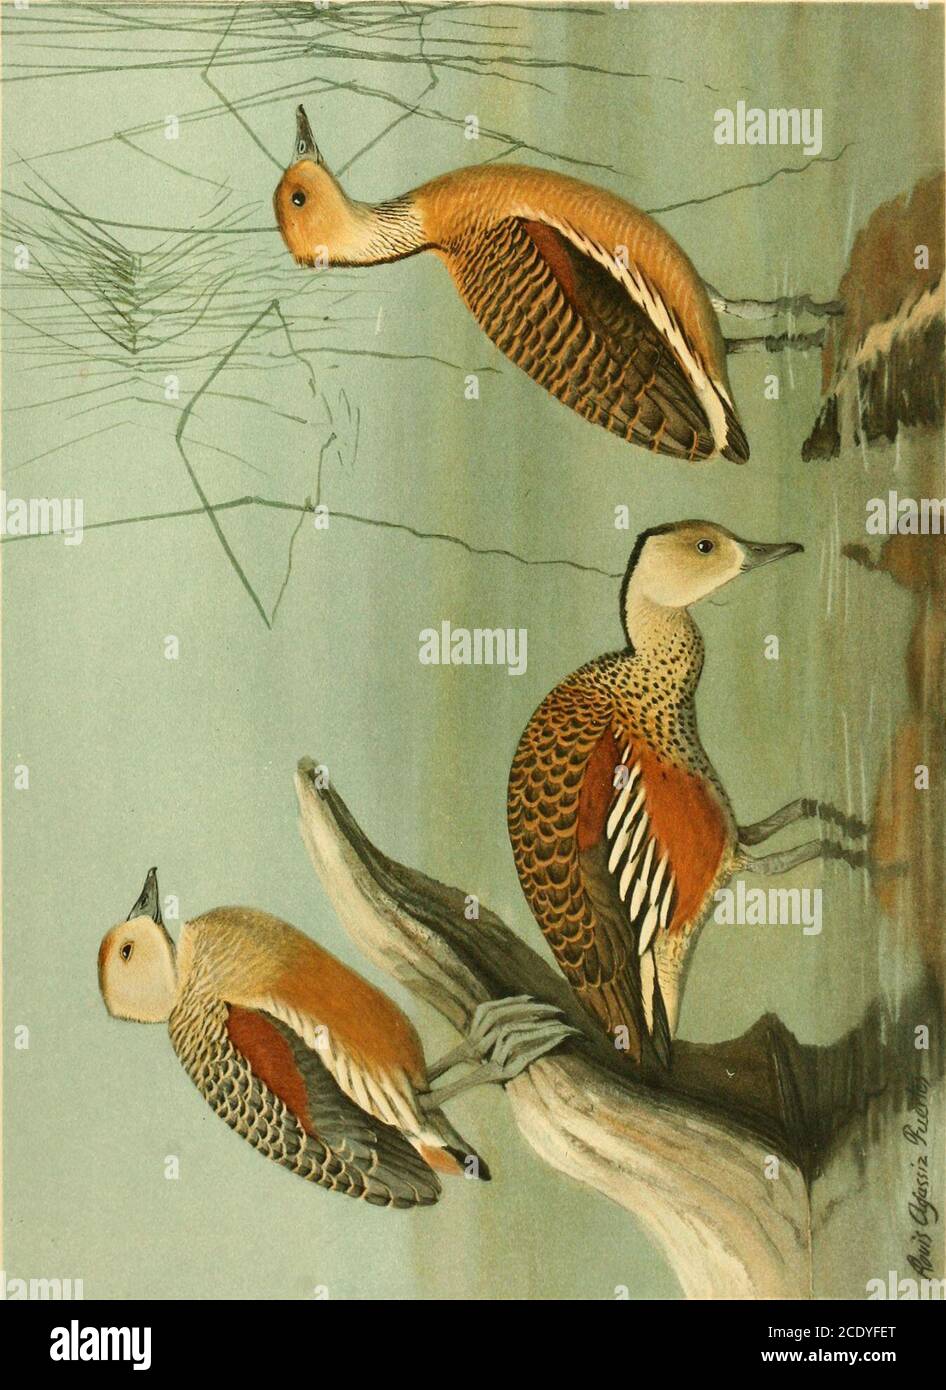 . A natural history of the ducks . des Sci. Nat., vol. 5, p. 136, 1816.Dendrocygna fulva Hartlaub, Syst. Verzeichn. Ges. Mus., p. 118, 1844.Dendrocygna arcuata G. R. Gray, List Birds Brit. Mus., vol. 3, p. 131, 1844 {nee Cuvier).Dendrocygna major Jerdon, Madras Journ., vol. 12, p. 218, 1840.Dendrocygna bicolor helva Wetmore and Peters, Proc. Biol. Soc. Washington, vol. 35, p. 42, 1922. Vernacular Names English: Fulvous or Fulvous-bellied Tree DuckLarger or Greater Whistling TealBrown Tree DuckBrown VicissiYellow-bellied FiddlerRufous DuckMexican DuckSquealerSpanish CavalierLong-legged Duck Fre Stock Photo